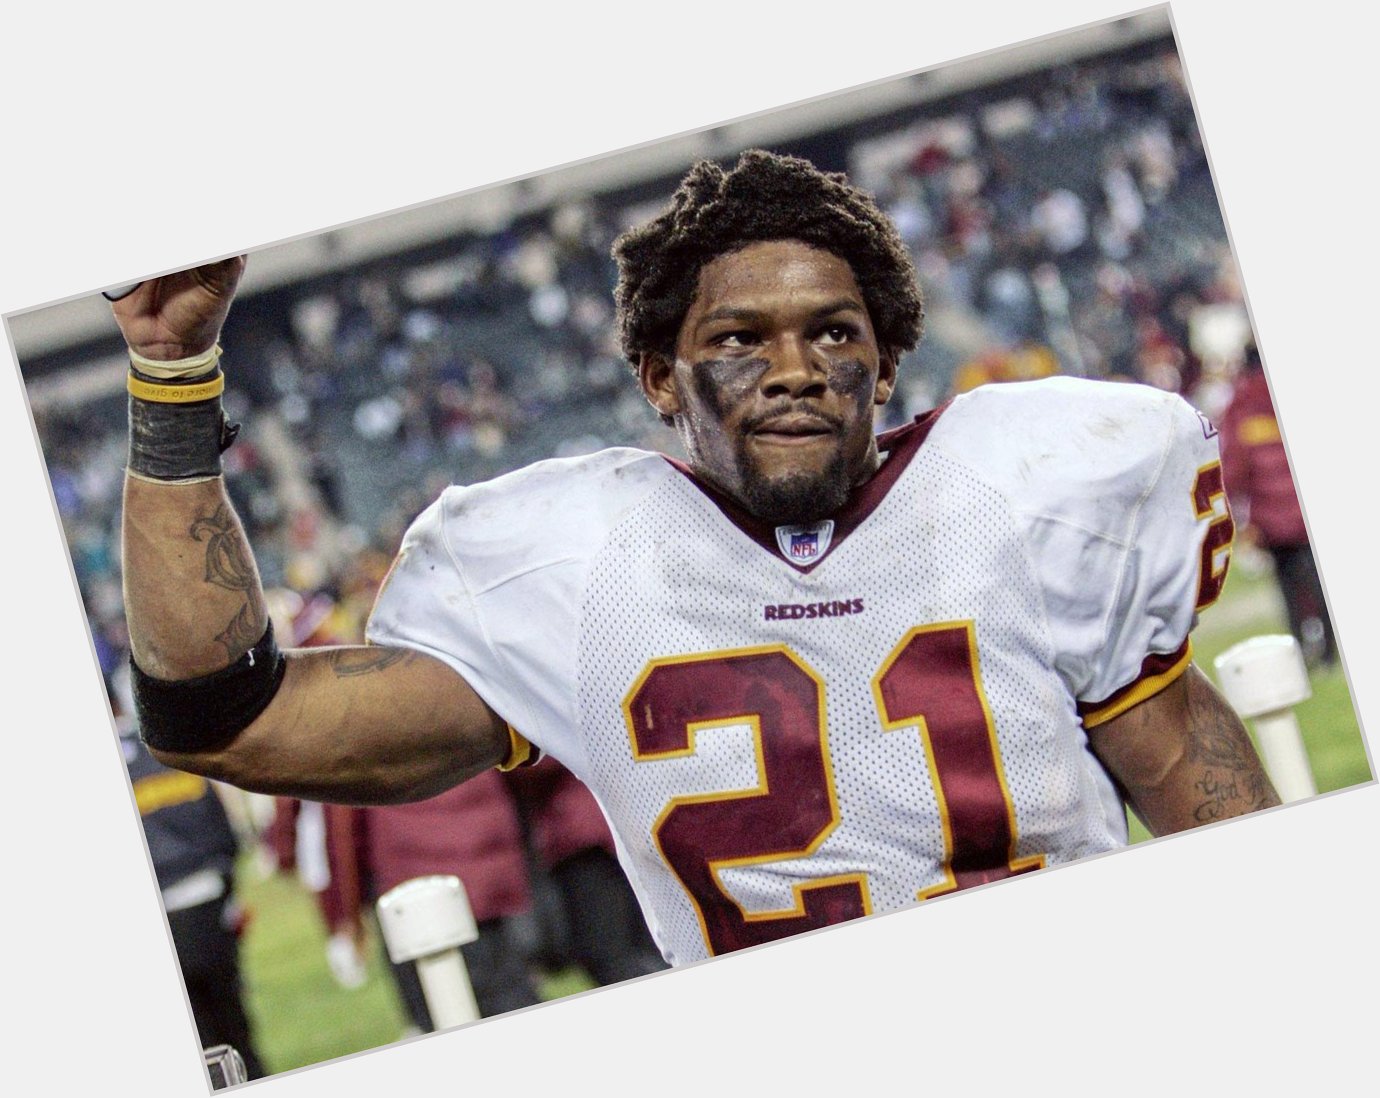   Happy Birthday Sean Taylor! You are truly missed and you will forever live in our hearts 